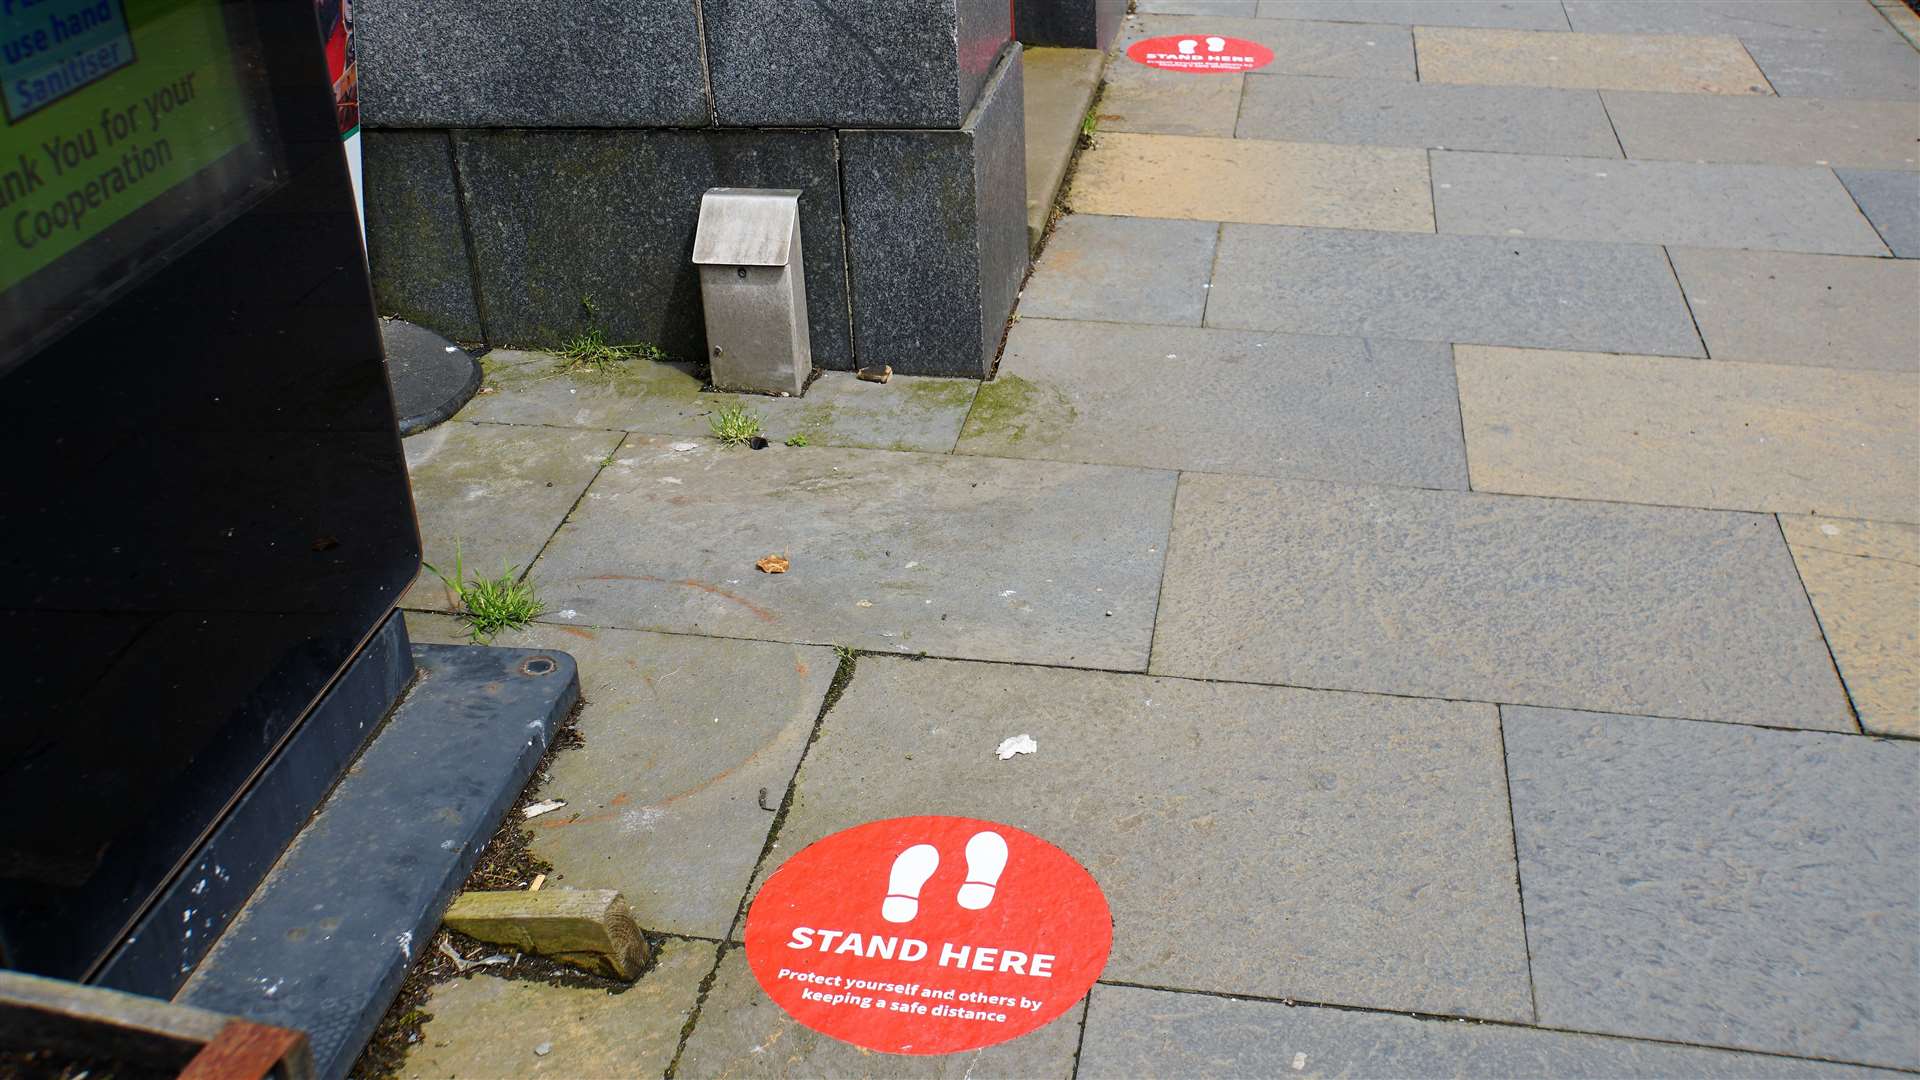 Social distancing measures are set in stone on Wick's pavements.